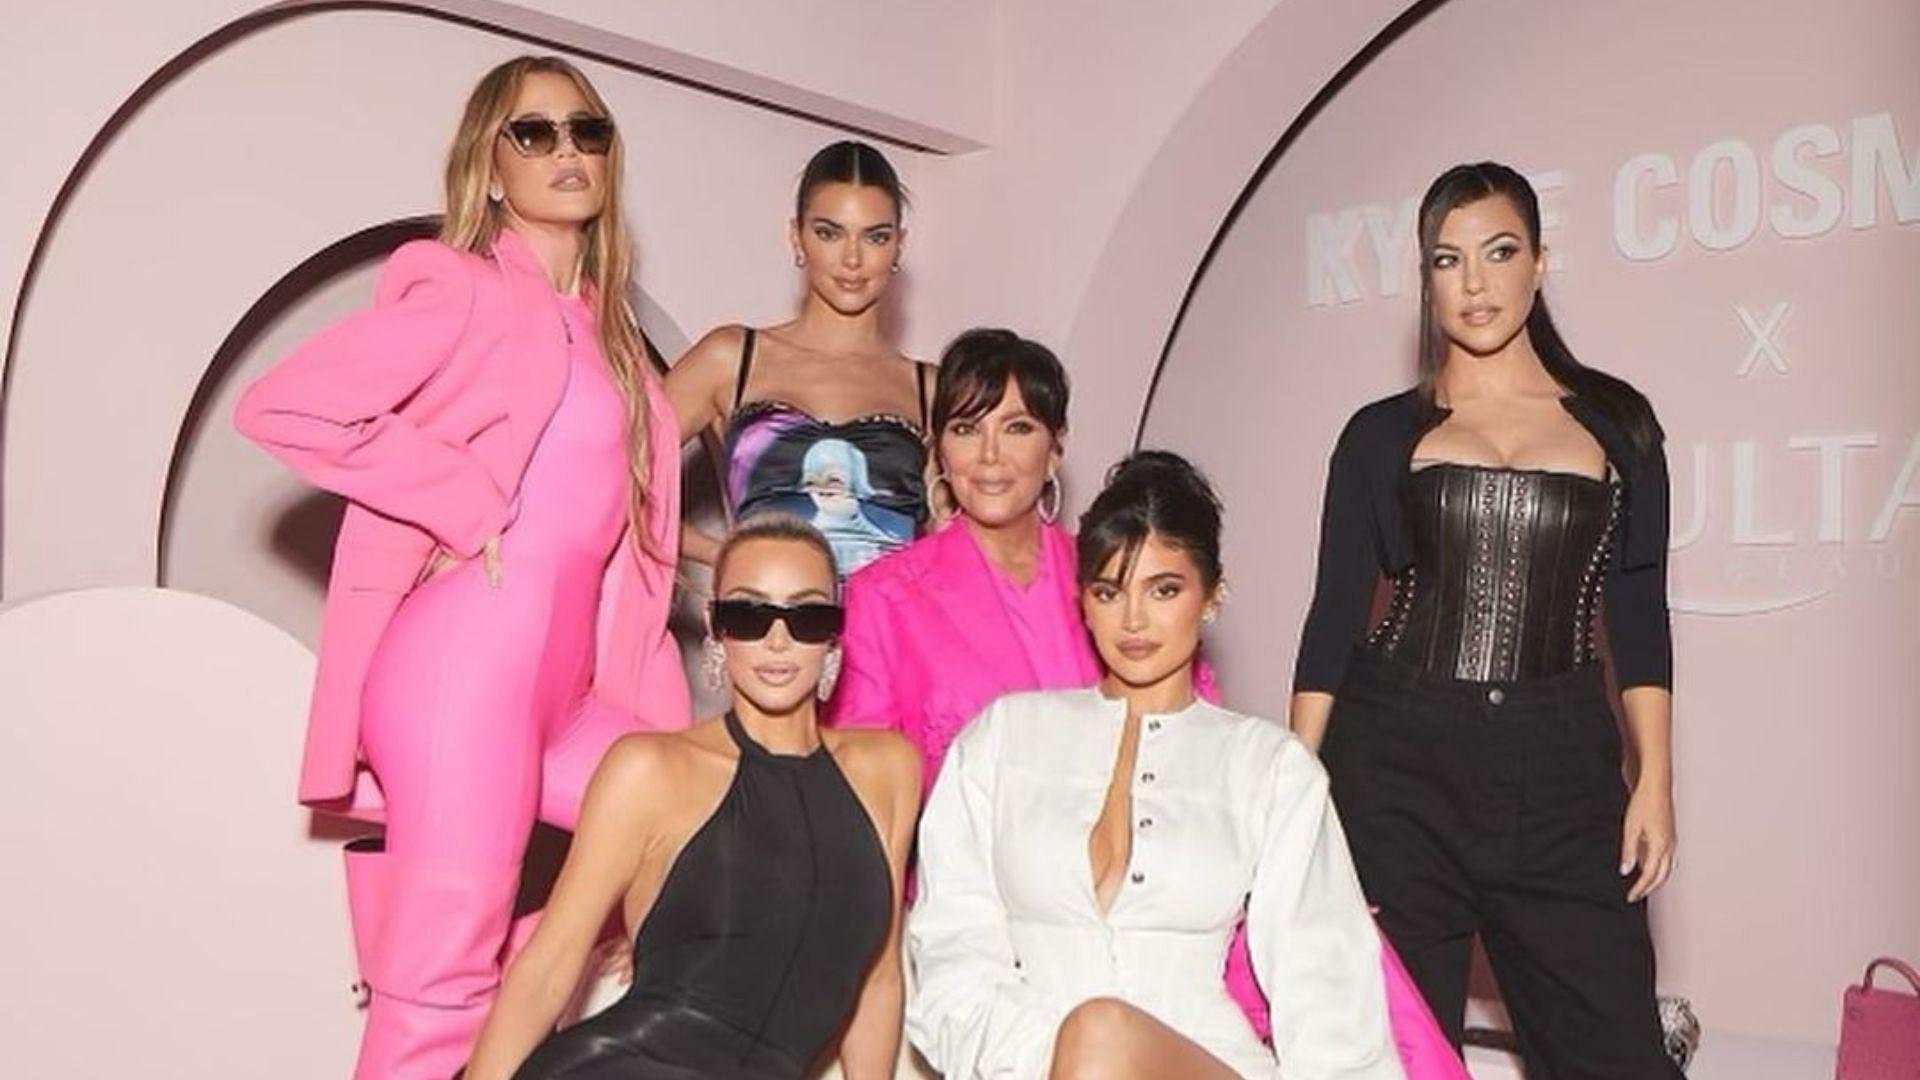 The Kardashians is set to return with another dramatic episode on Thursday